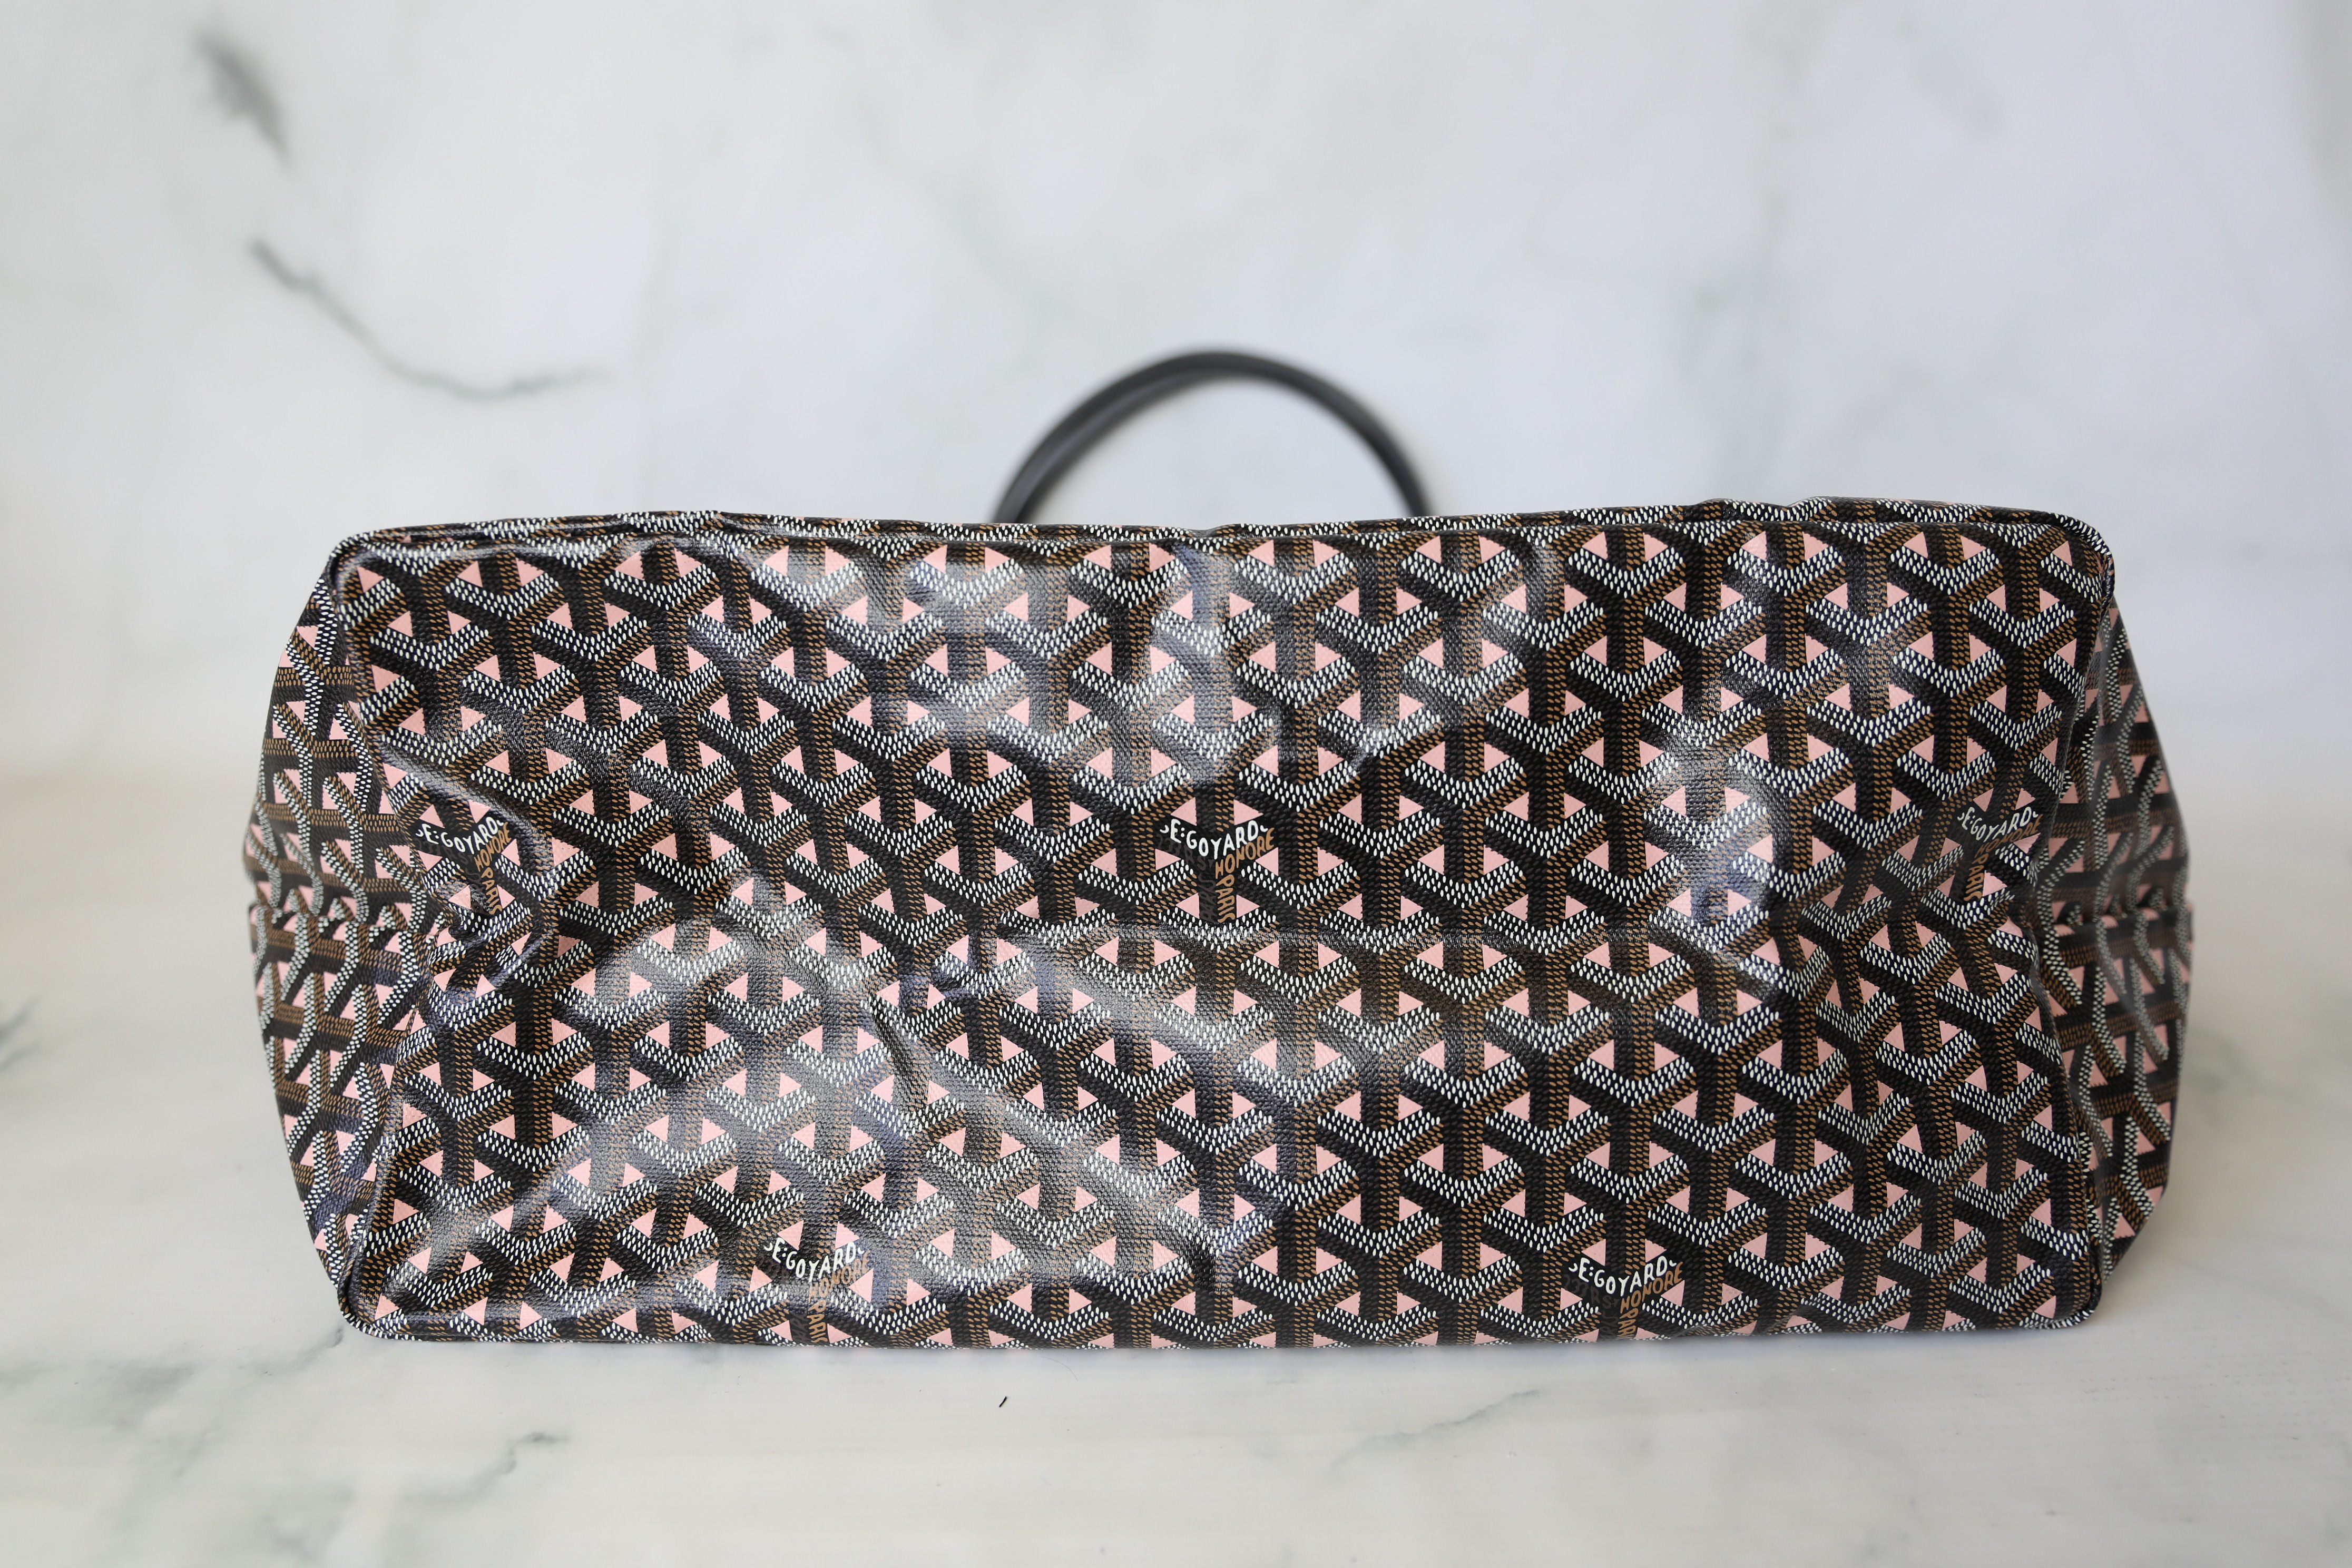 Goyard St. Louis Claire-Voie Tote GM, Black and Pink, New in Dustbag WA001